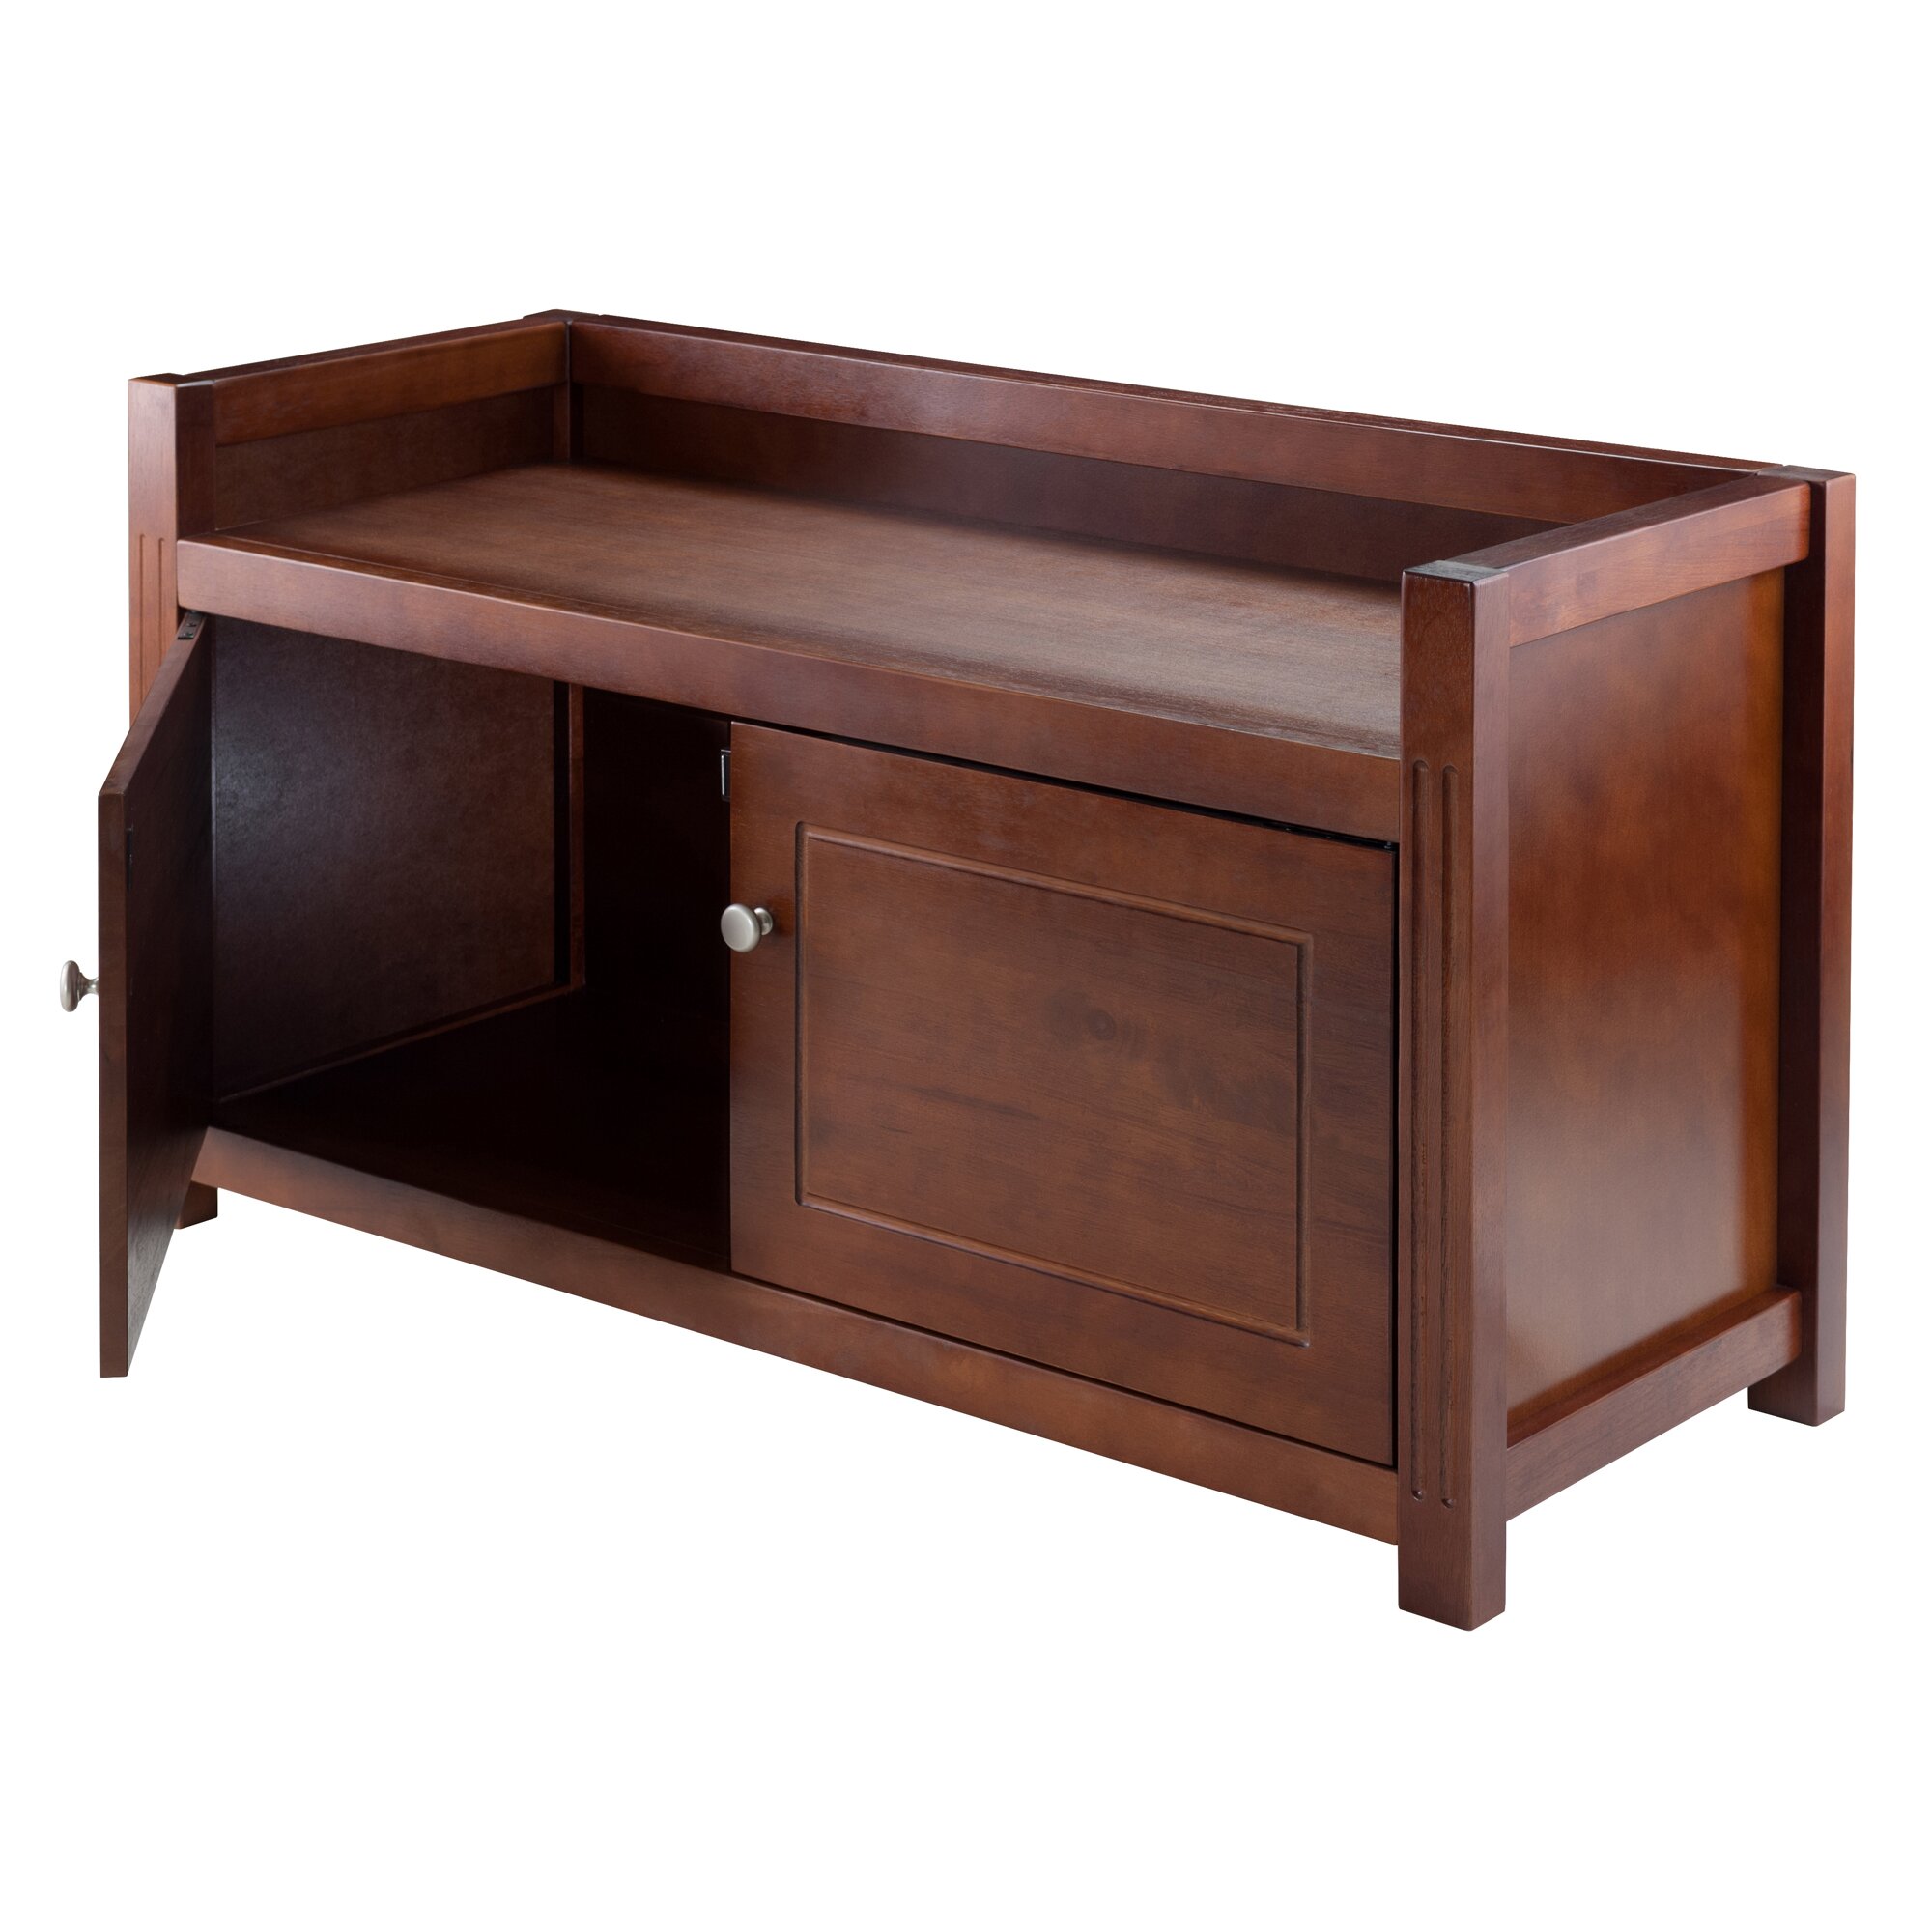 Winsome Wooden Storage Bench & Reviews Wayfair